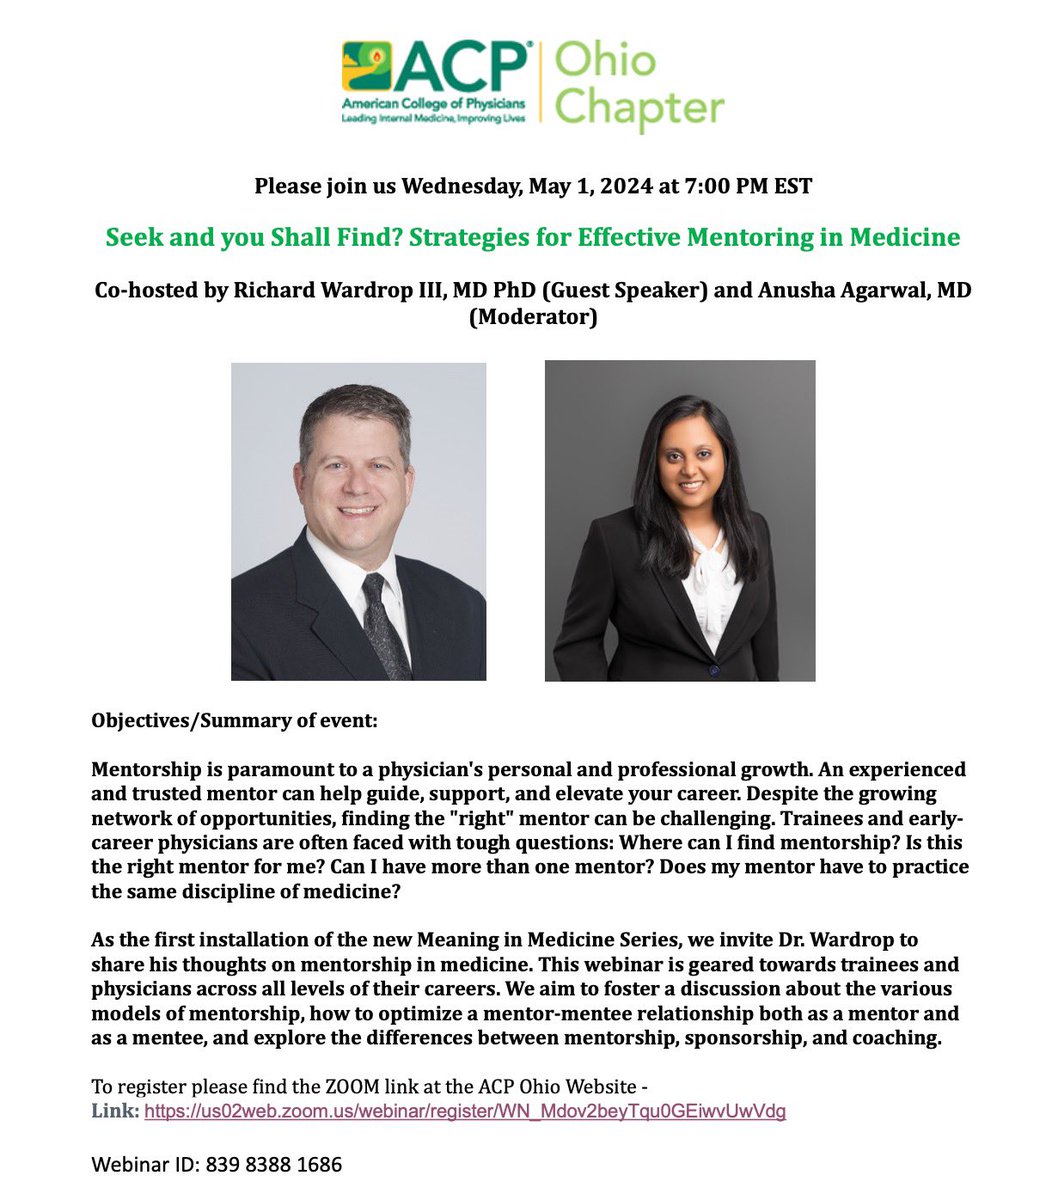 The Council of Residents & Fellows humbly invites you to attend the inaugural meeting of the Meaning in Medicine. We will get the opportunity to hear from my mentor, @Mud_Fud, on mentorship. This is for all trainees and physicians! @OhioAcp @medpedshosp @NewYorkACP